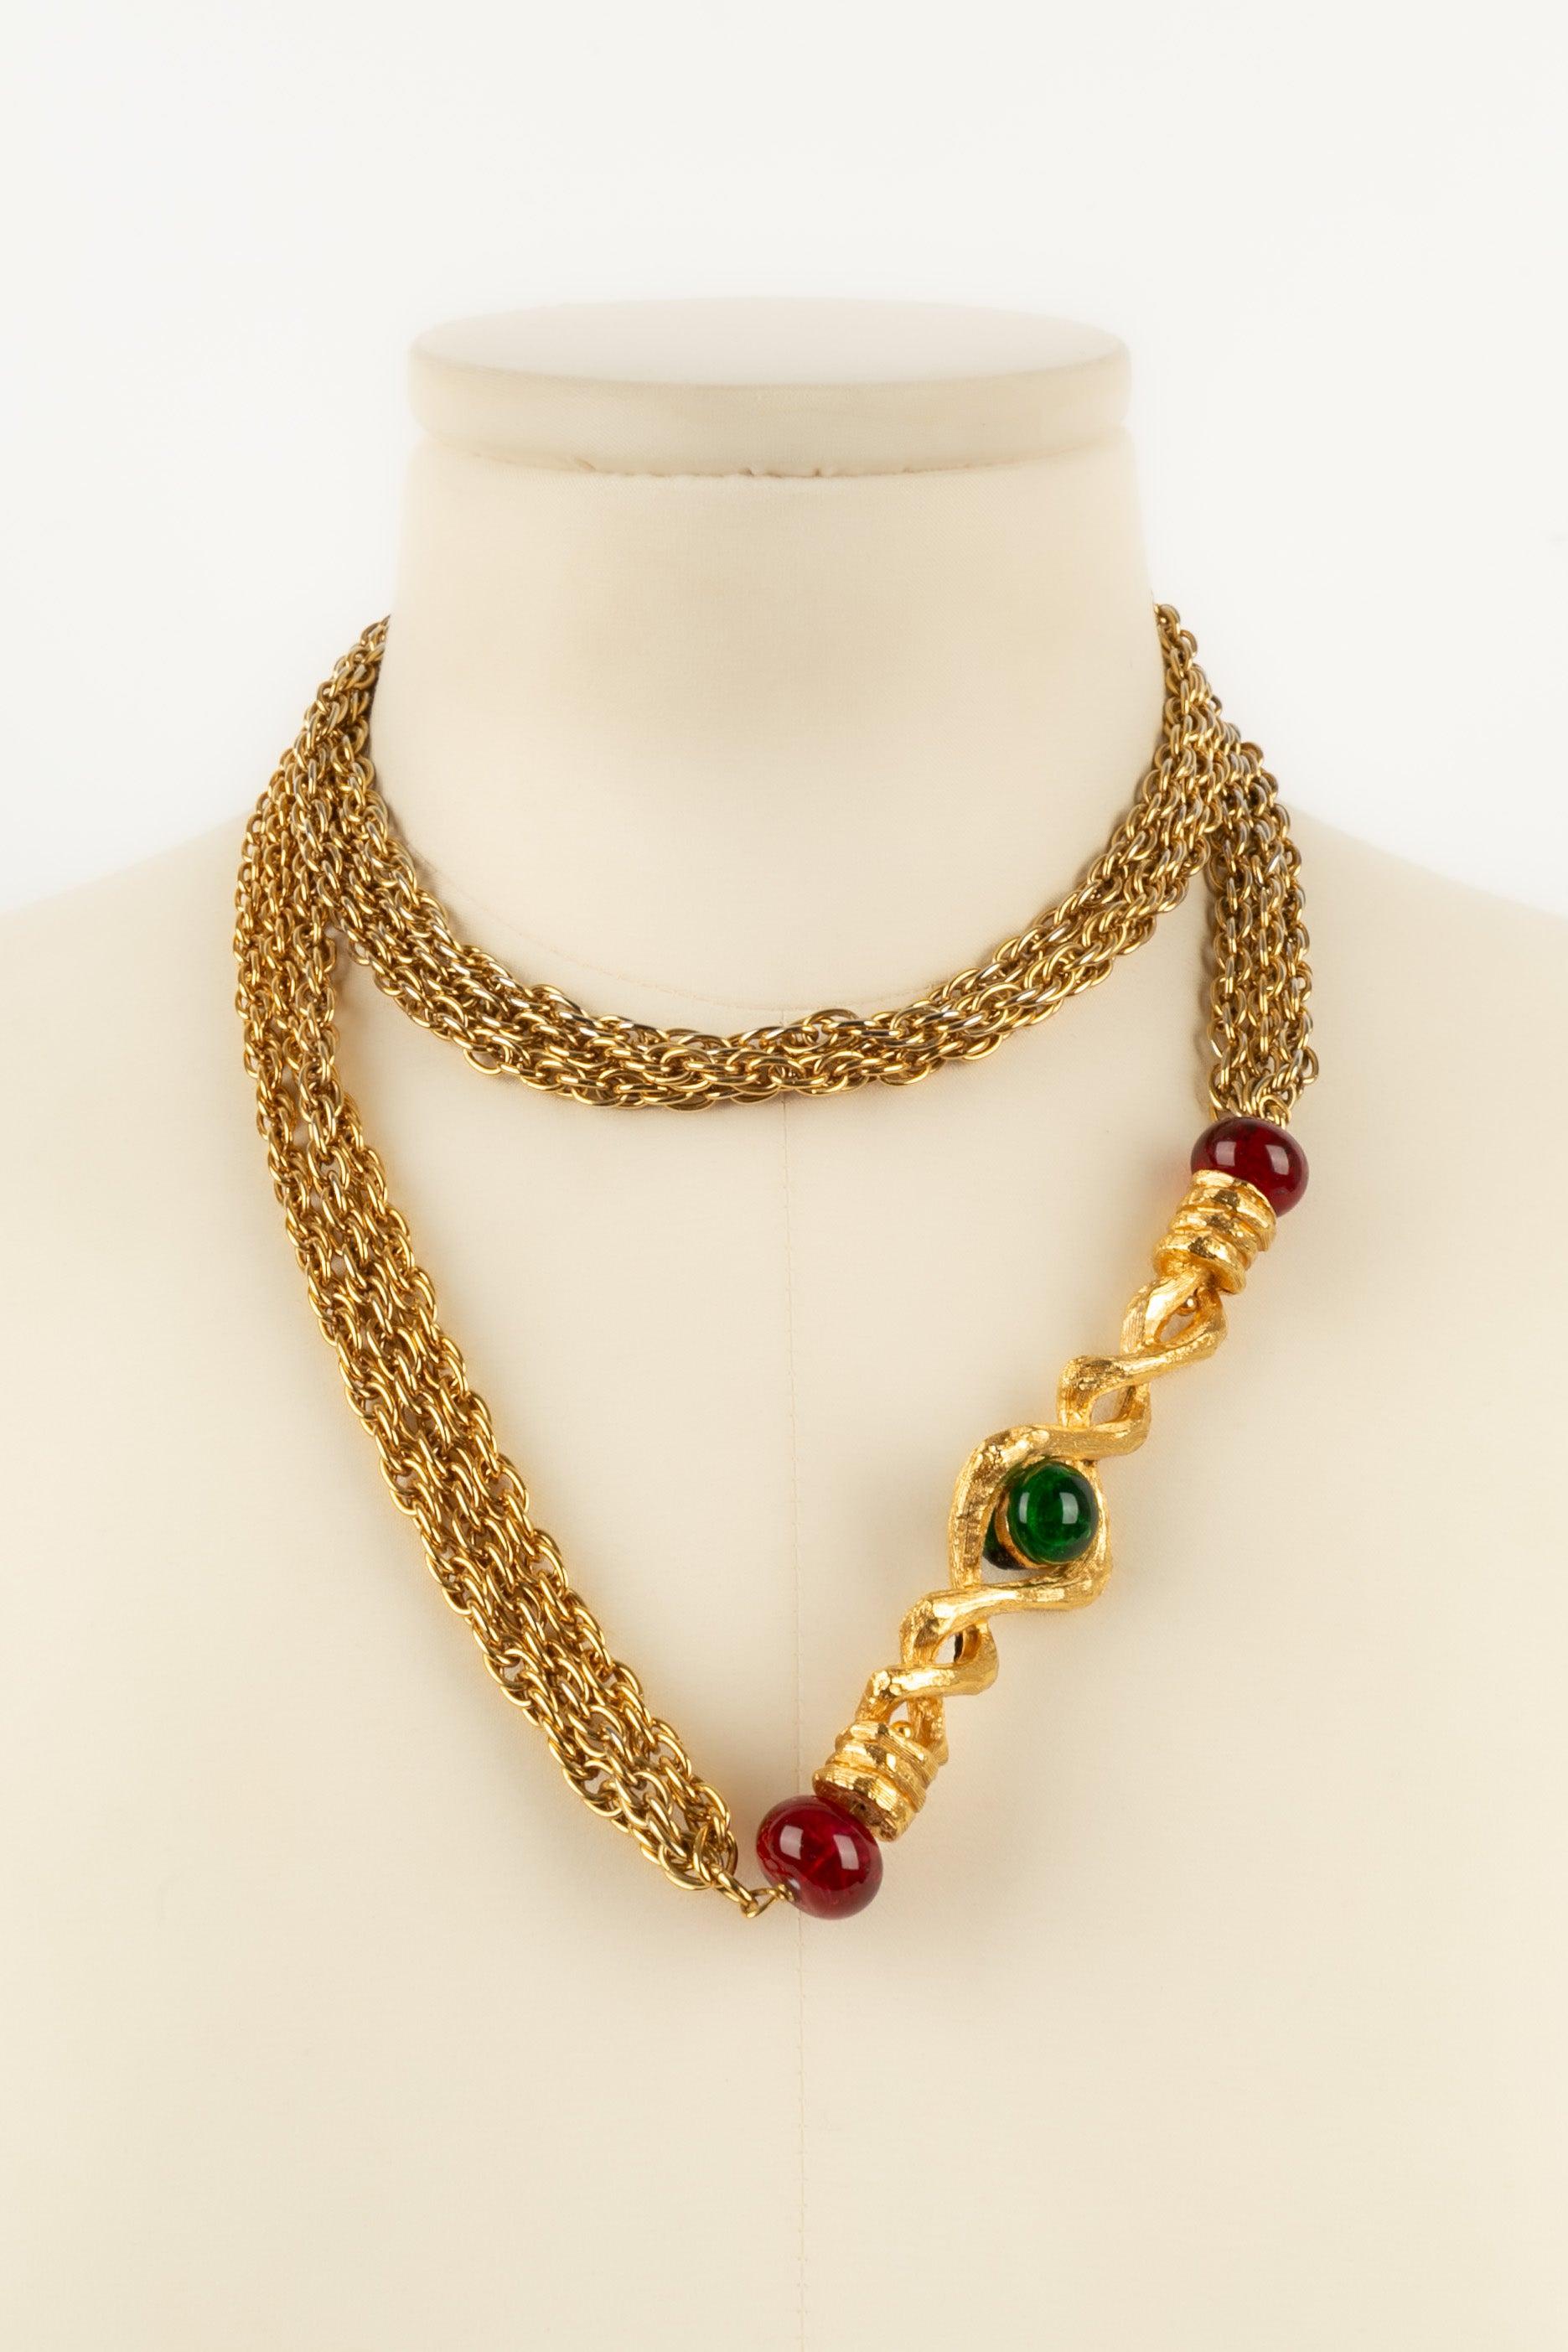 Women's Chanel Necklace in Gold-Plated Metal and Colored Glass Pearls For Sale